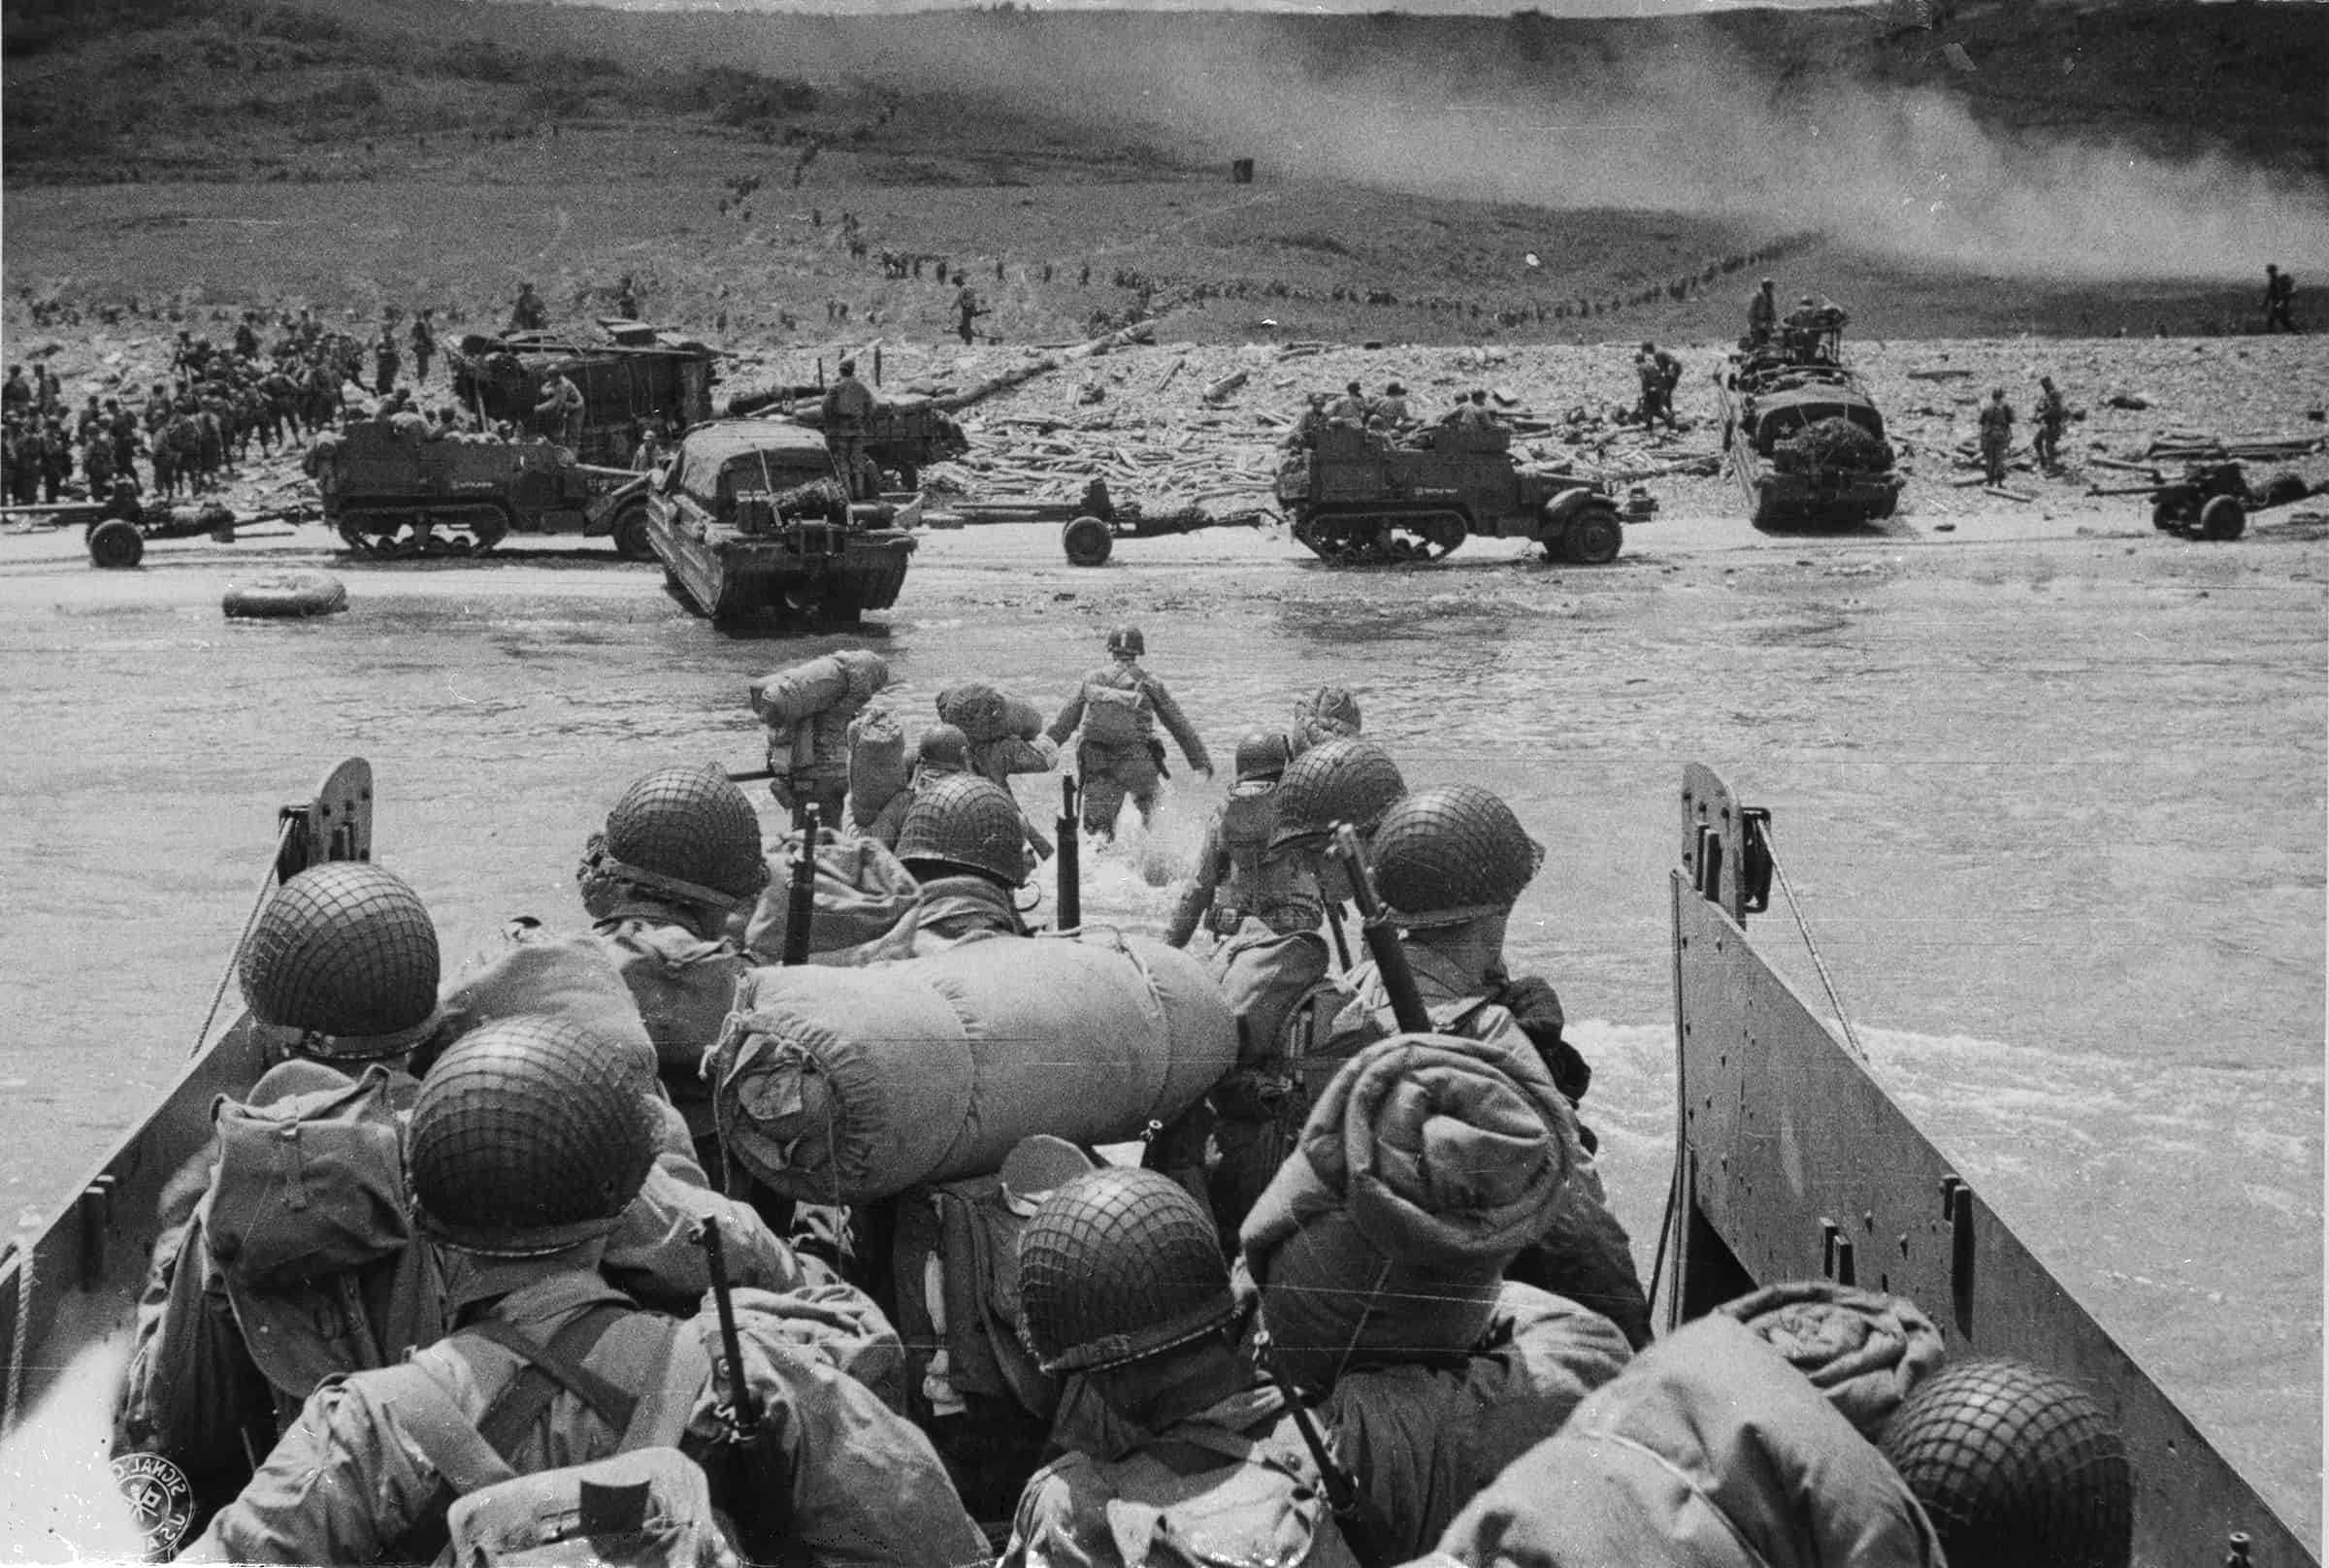 D-Day Anniversary photo of the invasion